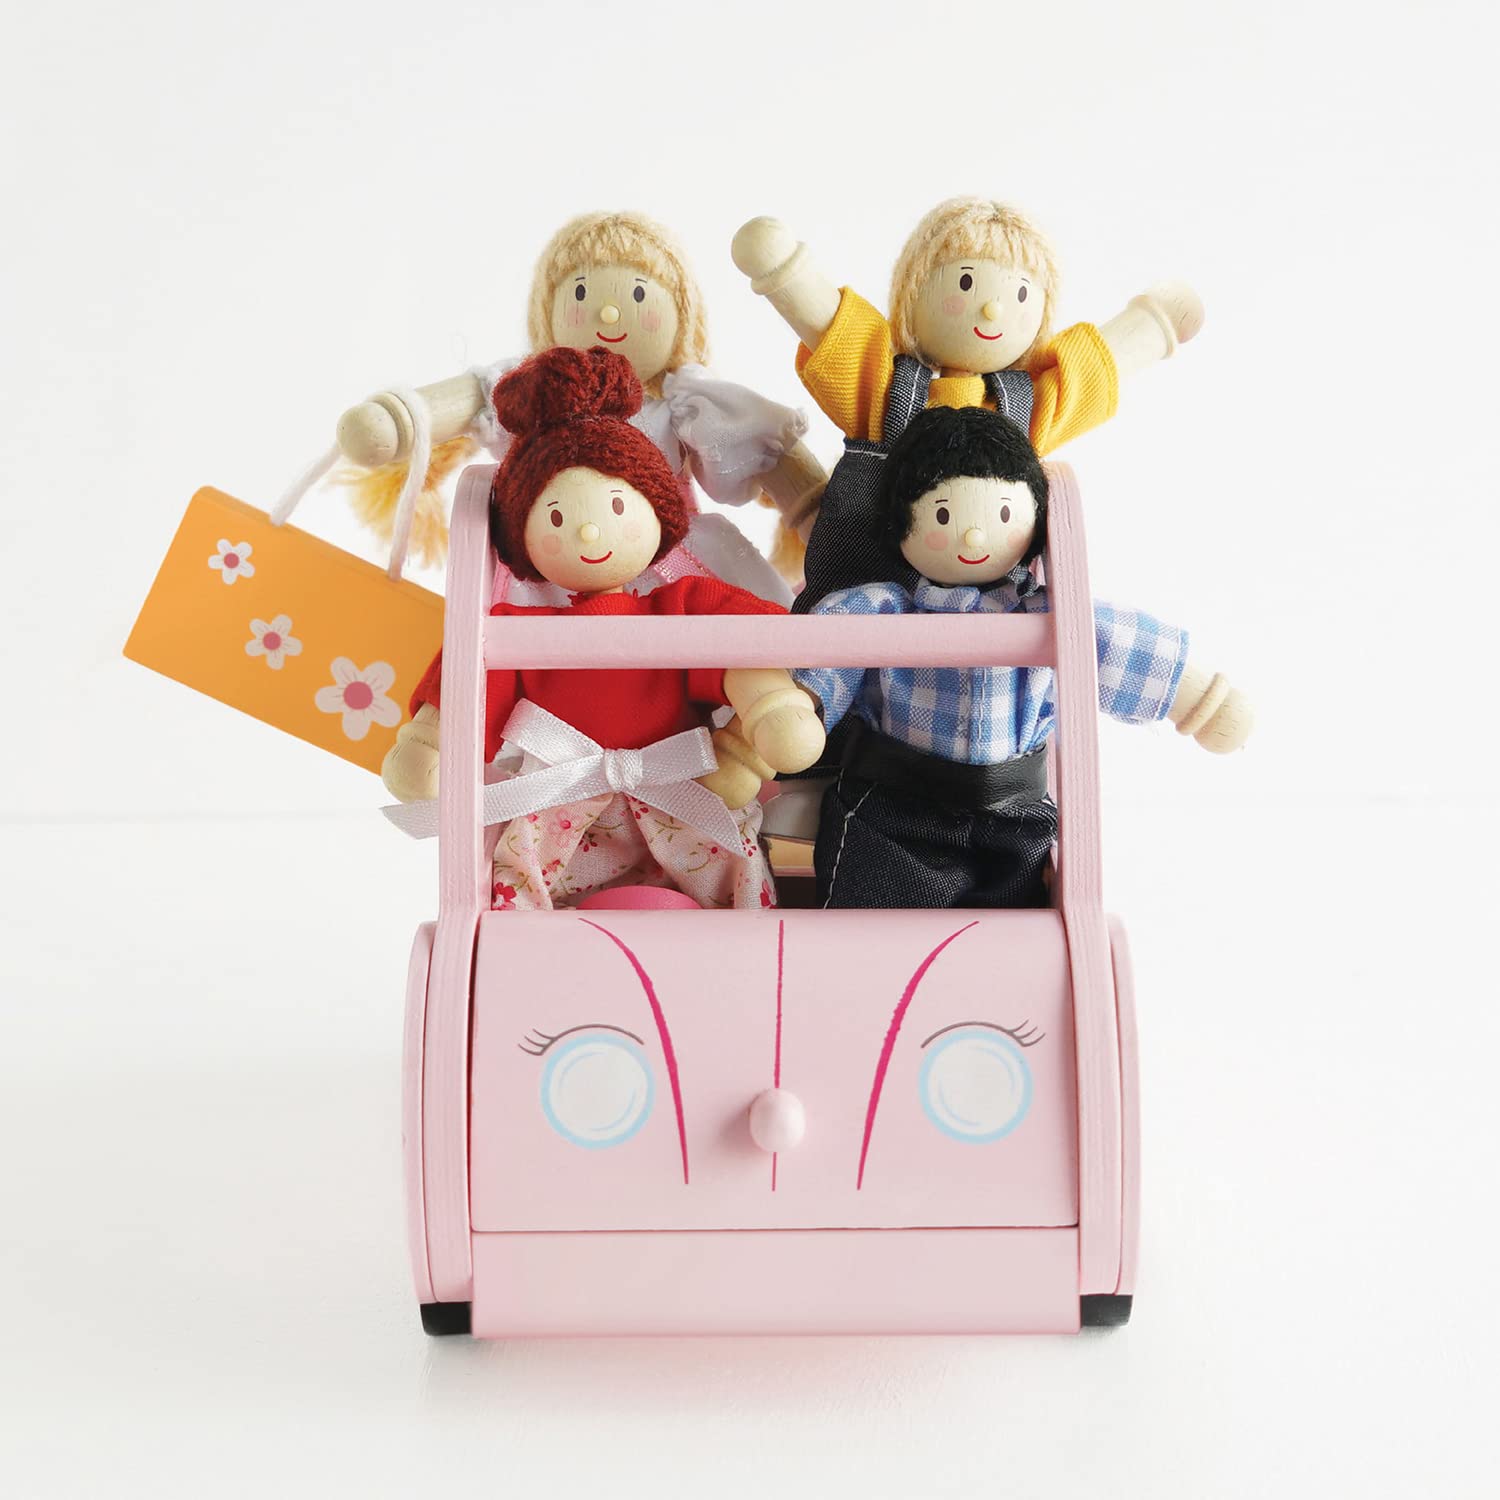 Le Toy Van - Wooden Daisylane Sophie's Car Accessories Play Set for Dolls Houses - Wooden Car Toy with Luggage Accessory - Dollhouse Accessories - Suitable for Ages 2+,Bright Pink, Medium